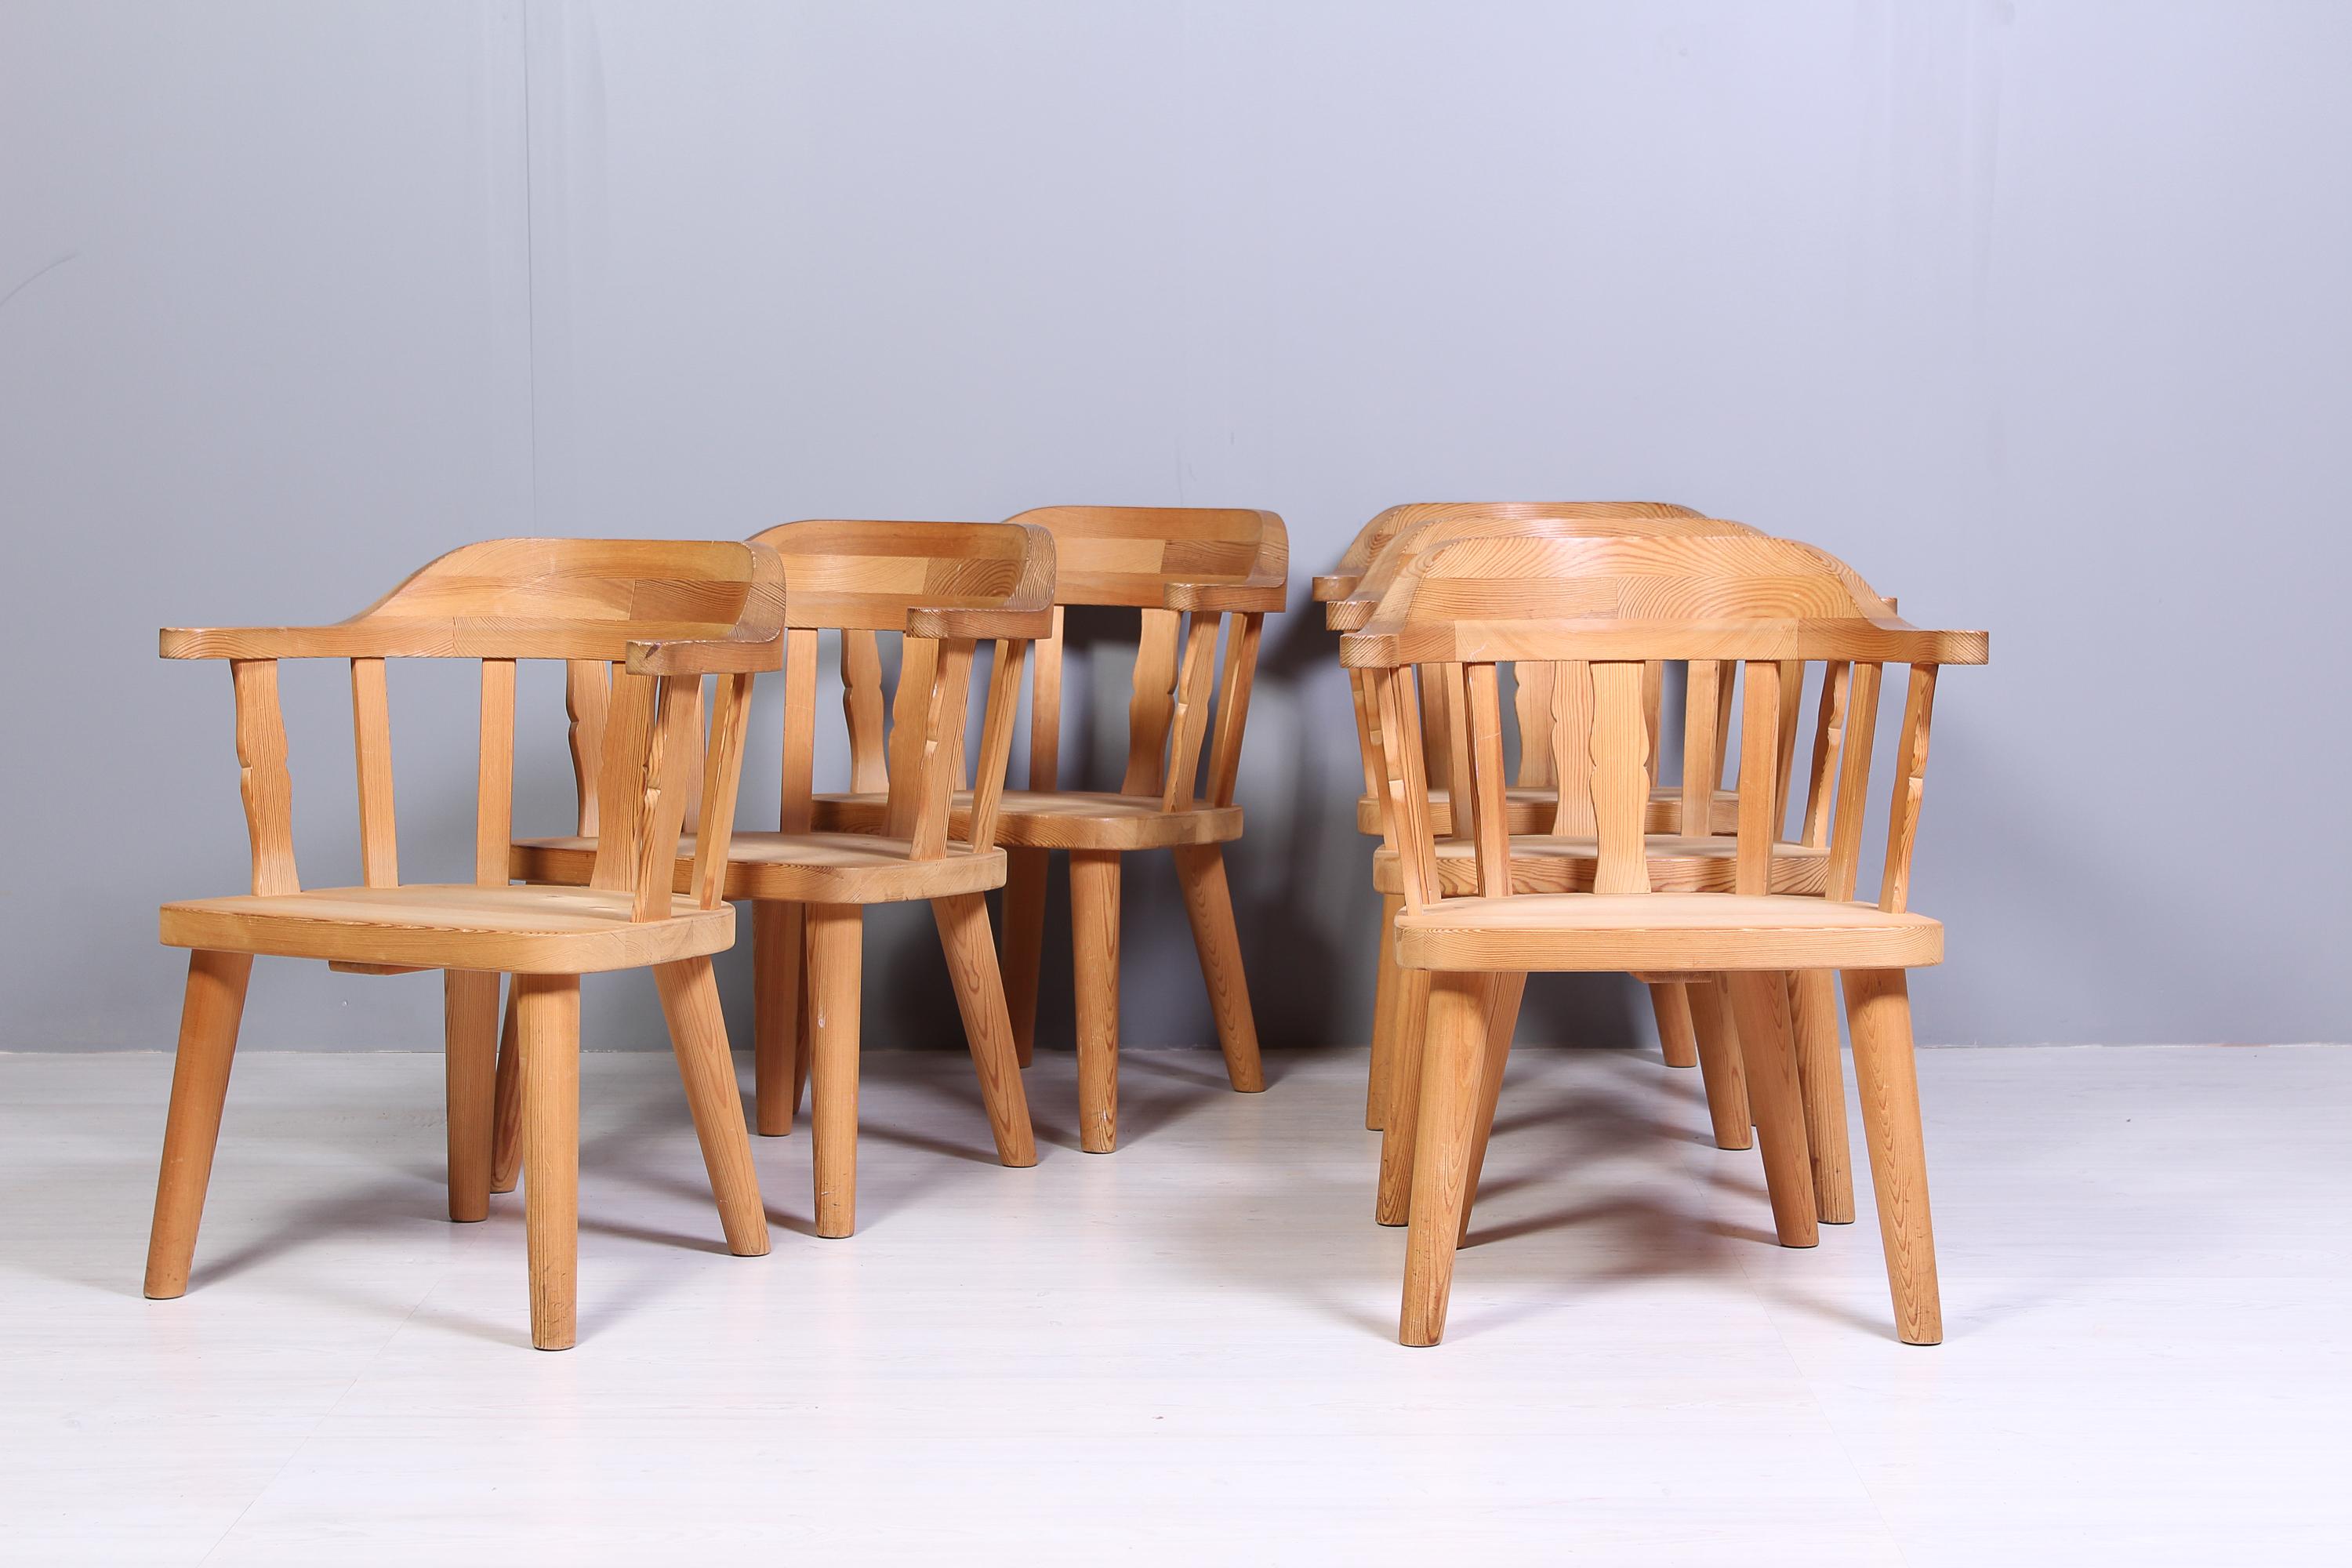 A set of six pine armchairs by the Norwegian manufacturer Krogenäs. Made in second half of the 20th century. All six chairs are made out of solid pine and are in very good vintage condition with signs of usage consistent with age. Very stabile and